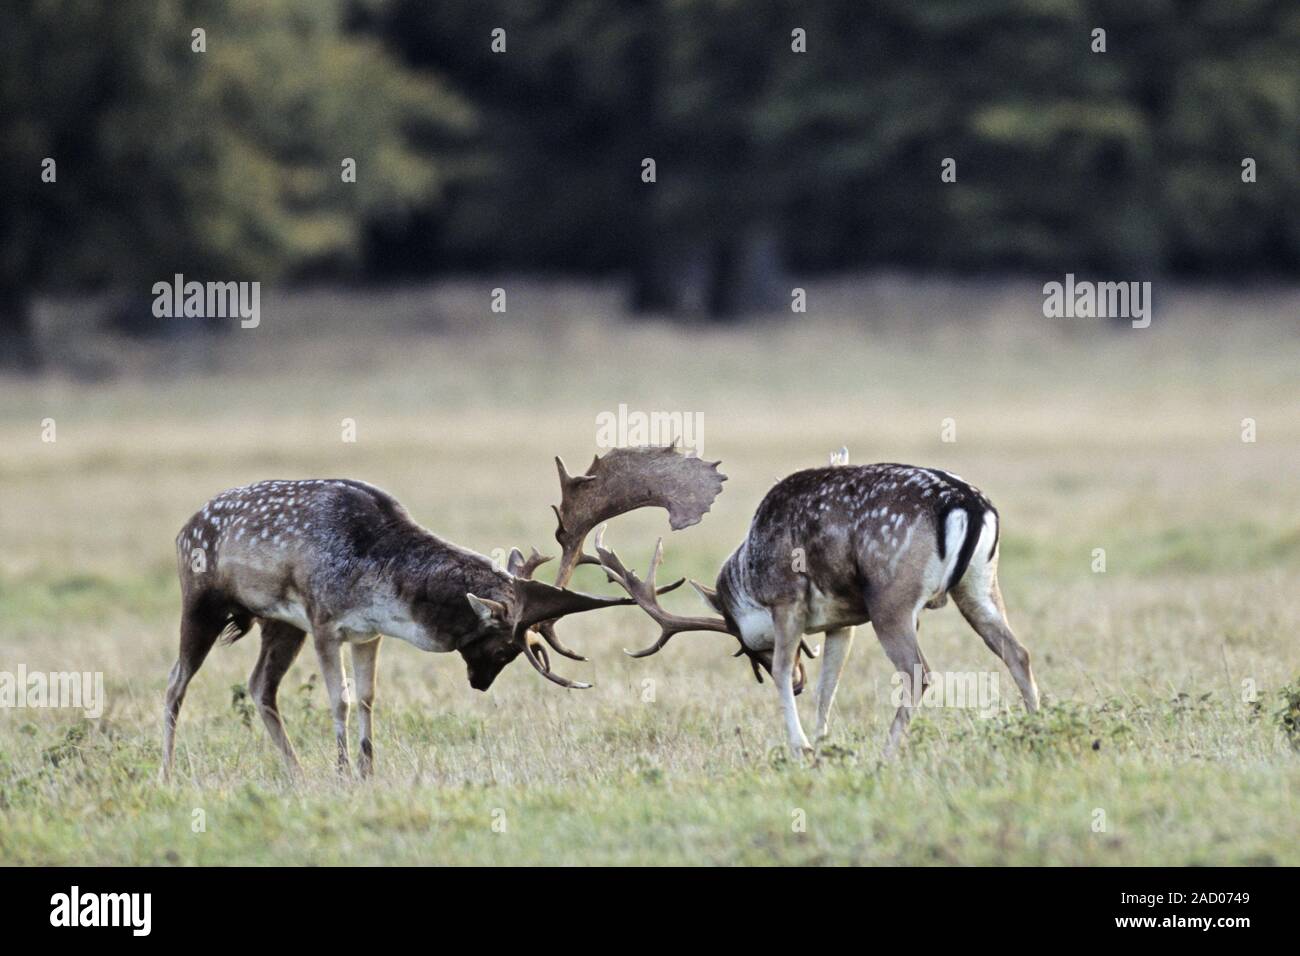 Fallow Deer, during conflict the bucks behavior escalates from groaning, parallel walks to fightingi Stock Photo